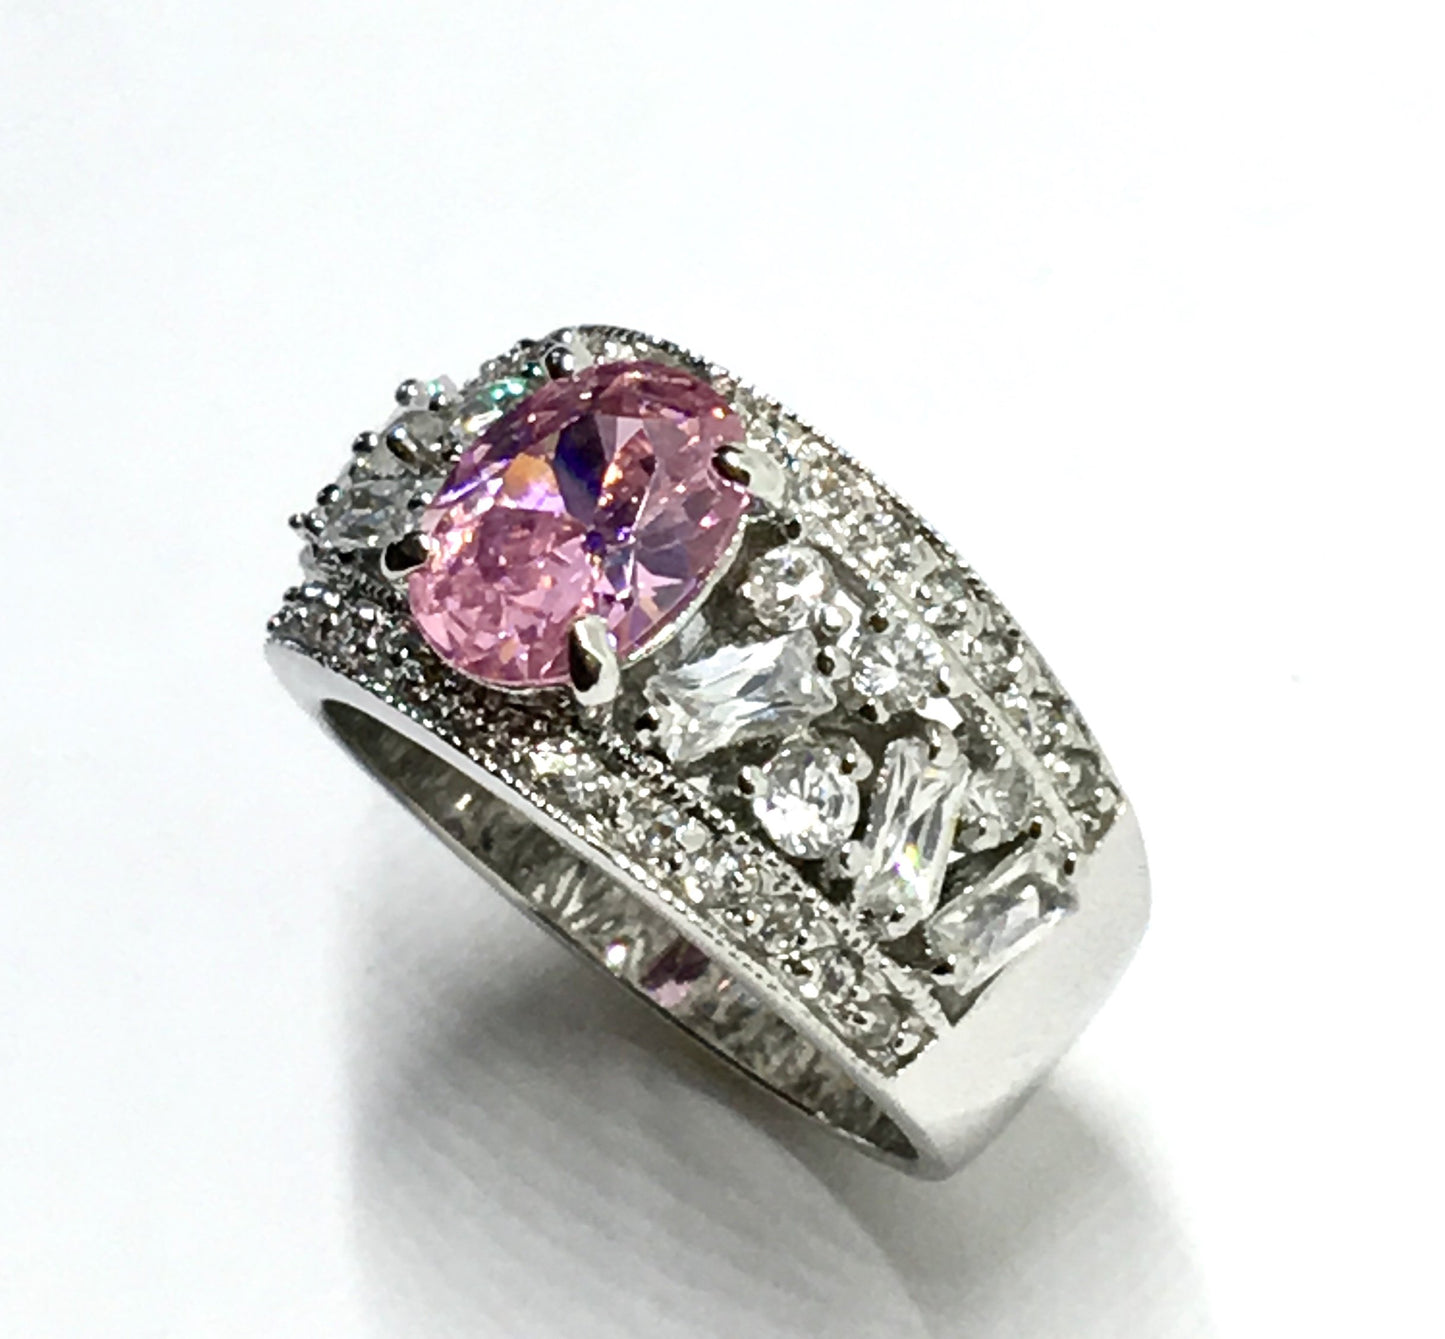 Gemstone Ring - Womens Pre-owned Exquisite Sterling Silver Fancy Pink Oval Wide Band Ring